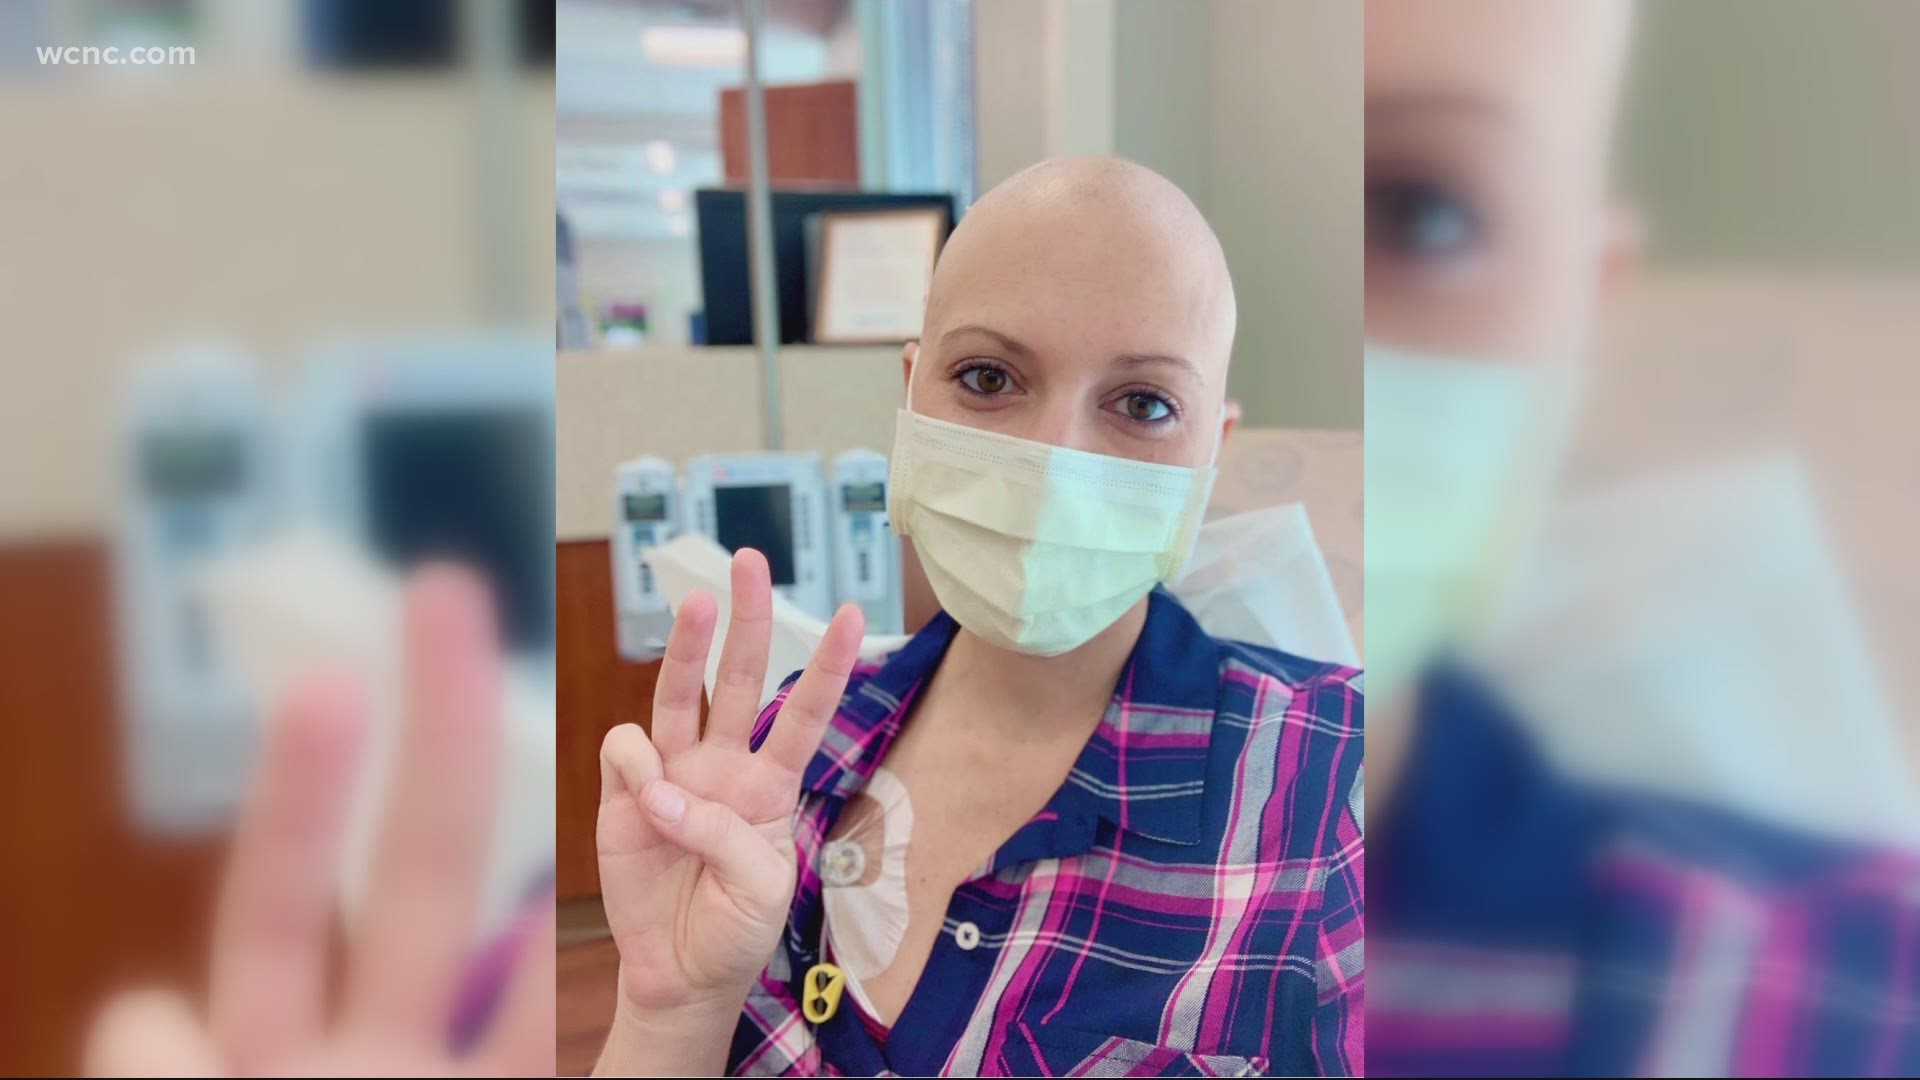 A Charlotte mom diagnosed with breast cancer is seeing support from a moms group, including people she doesn't even know.